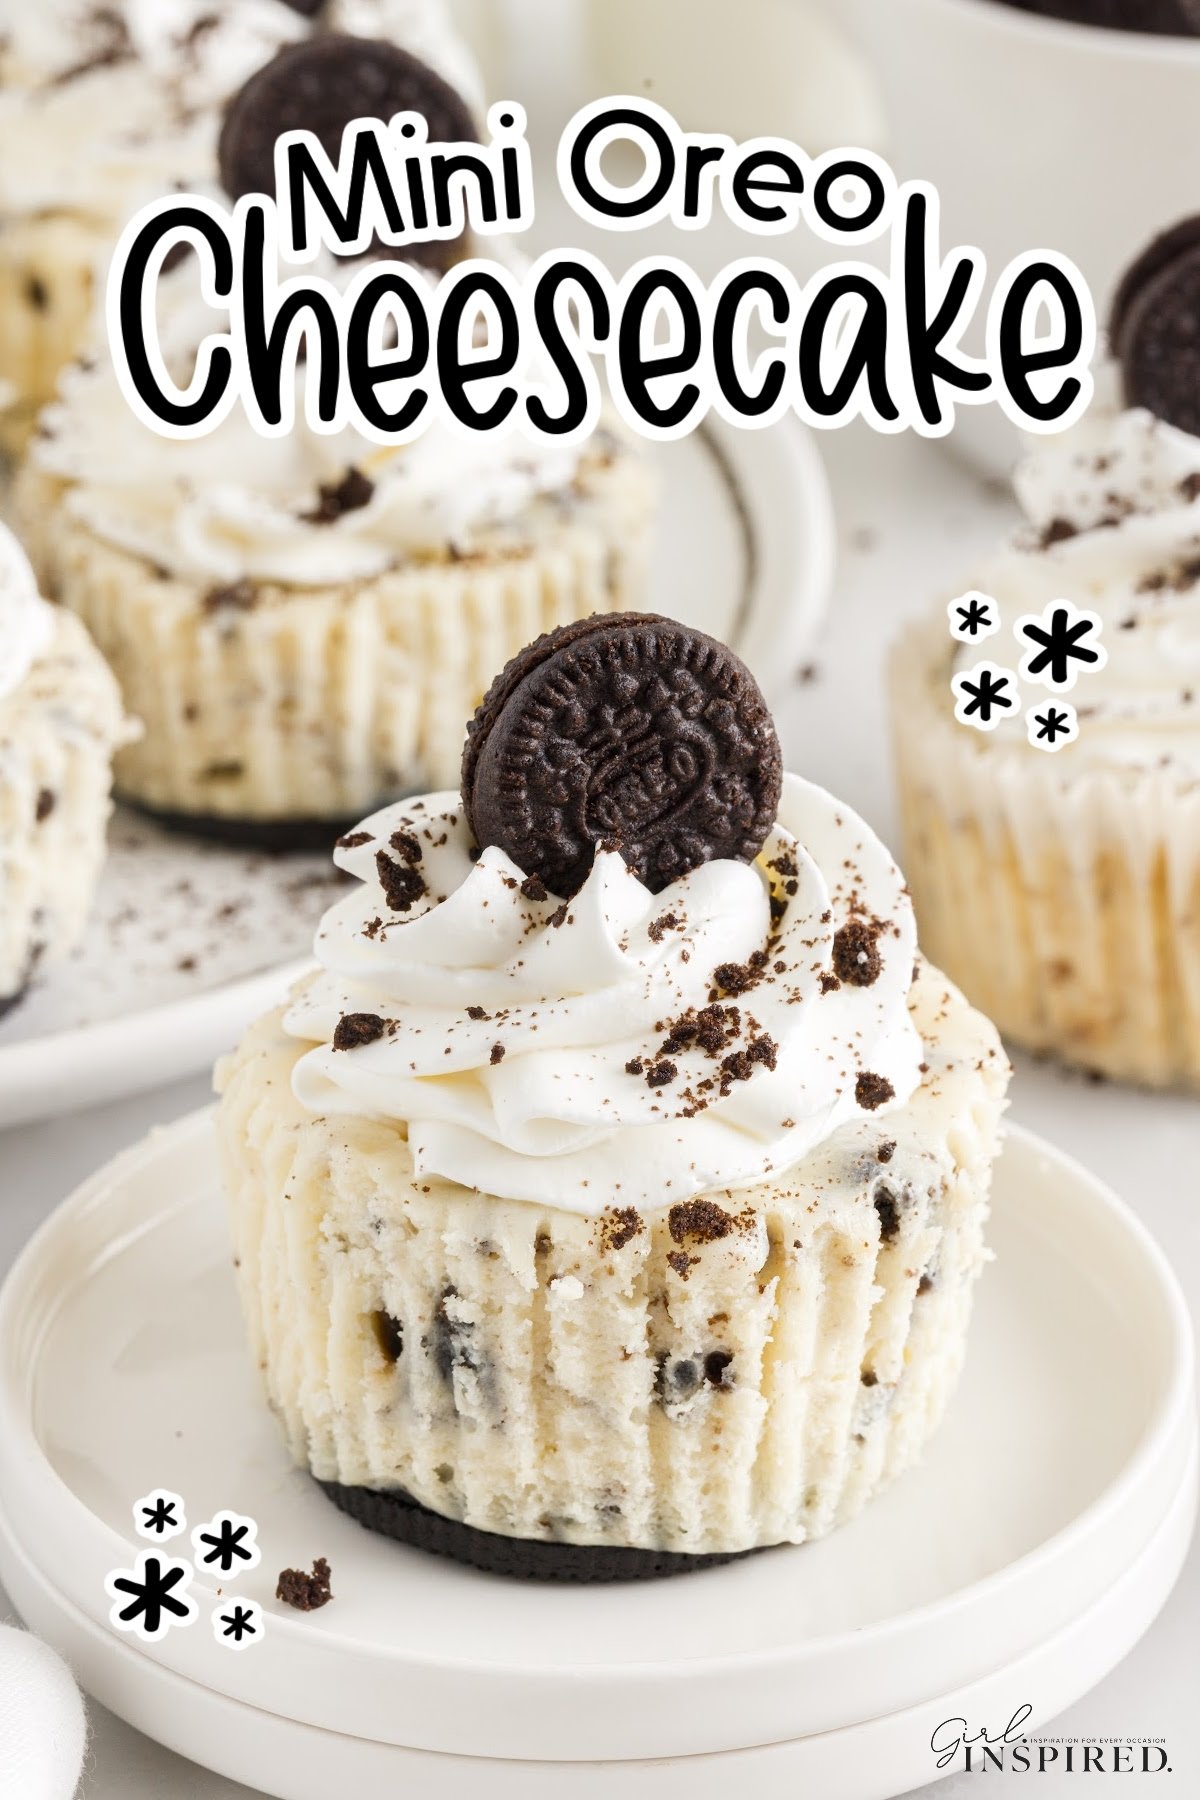 Mini Oreo Cheesecake on a plate topped with whipped cream and an oreo cookie, with text overlay.